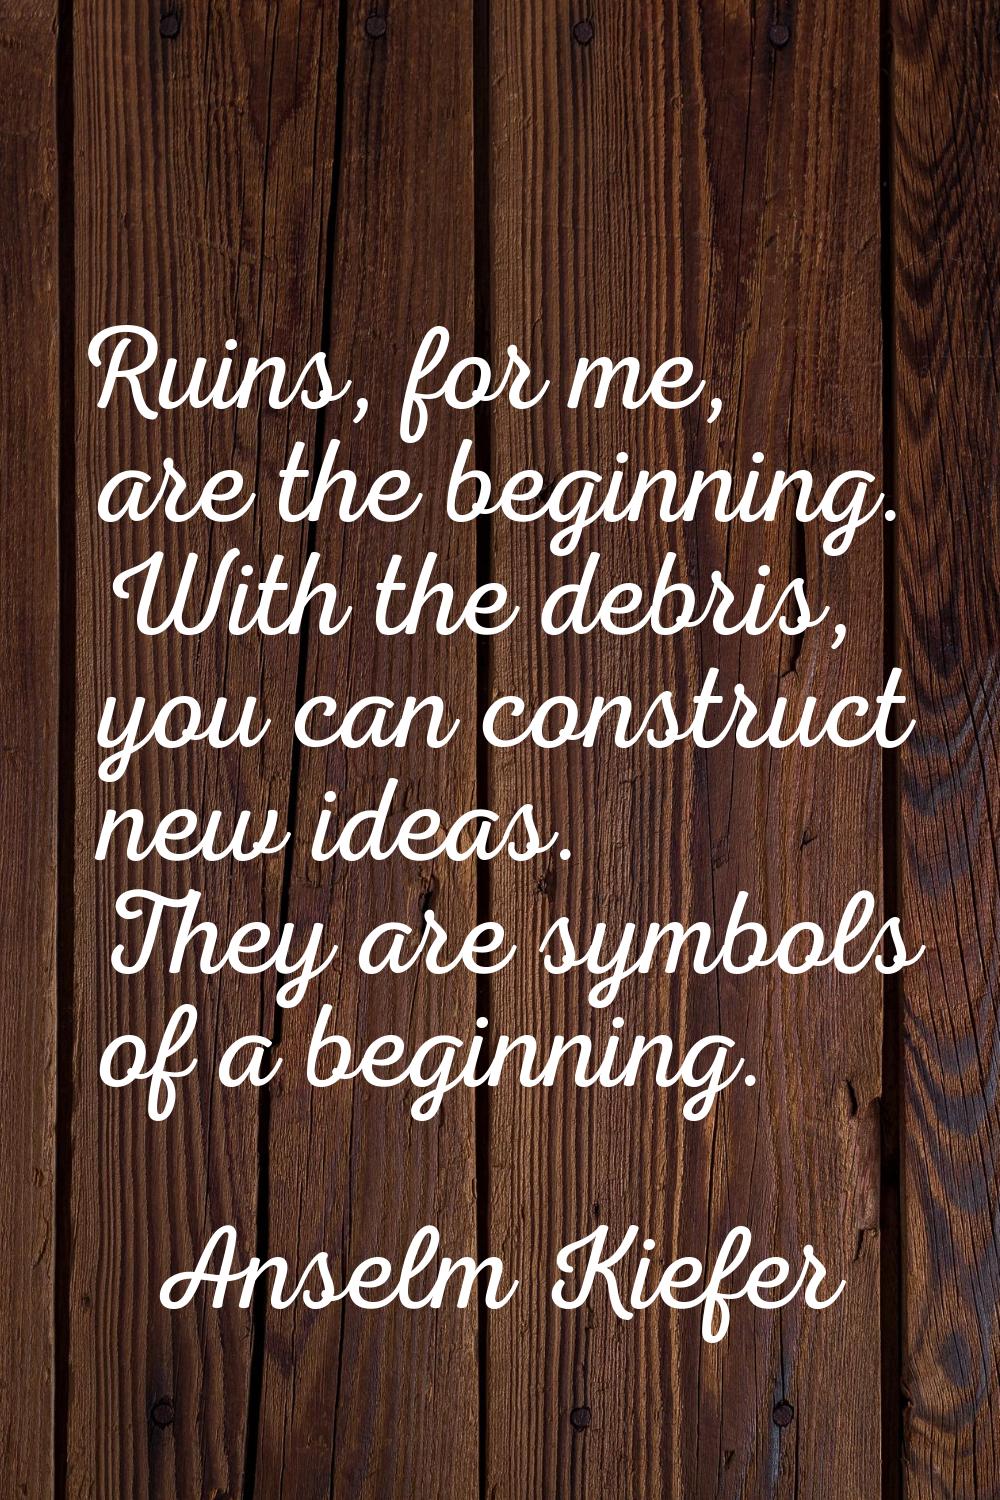 Ruins, for me, are the beginning. With the debris, you can construct new ideas. They are symbols of